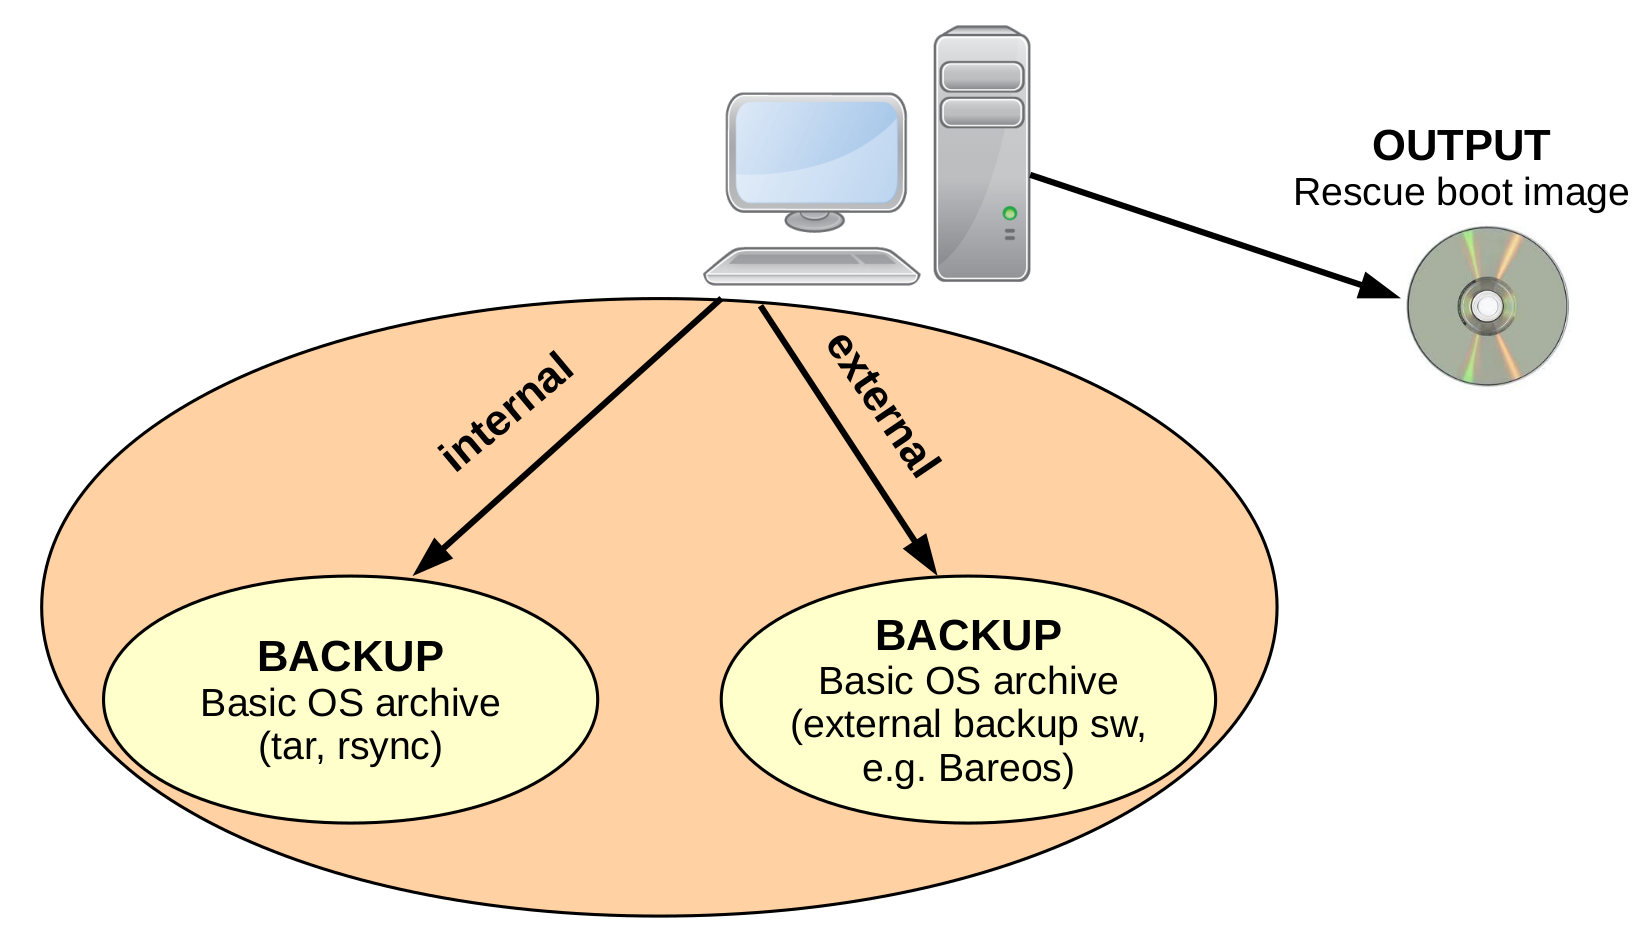 An simple overview of BACKUP and OUTPUT